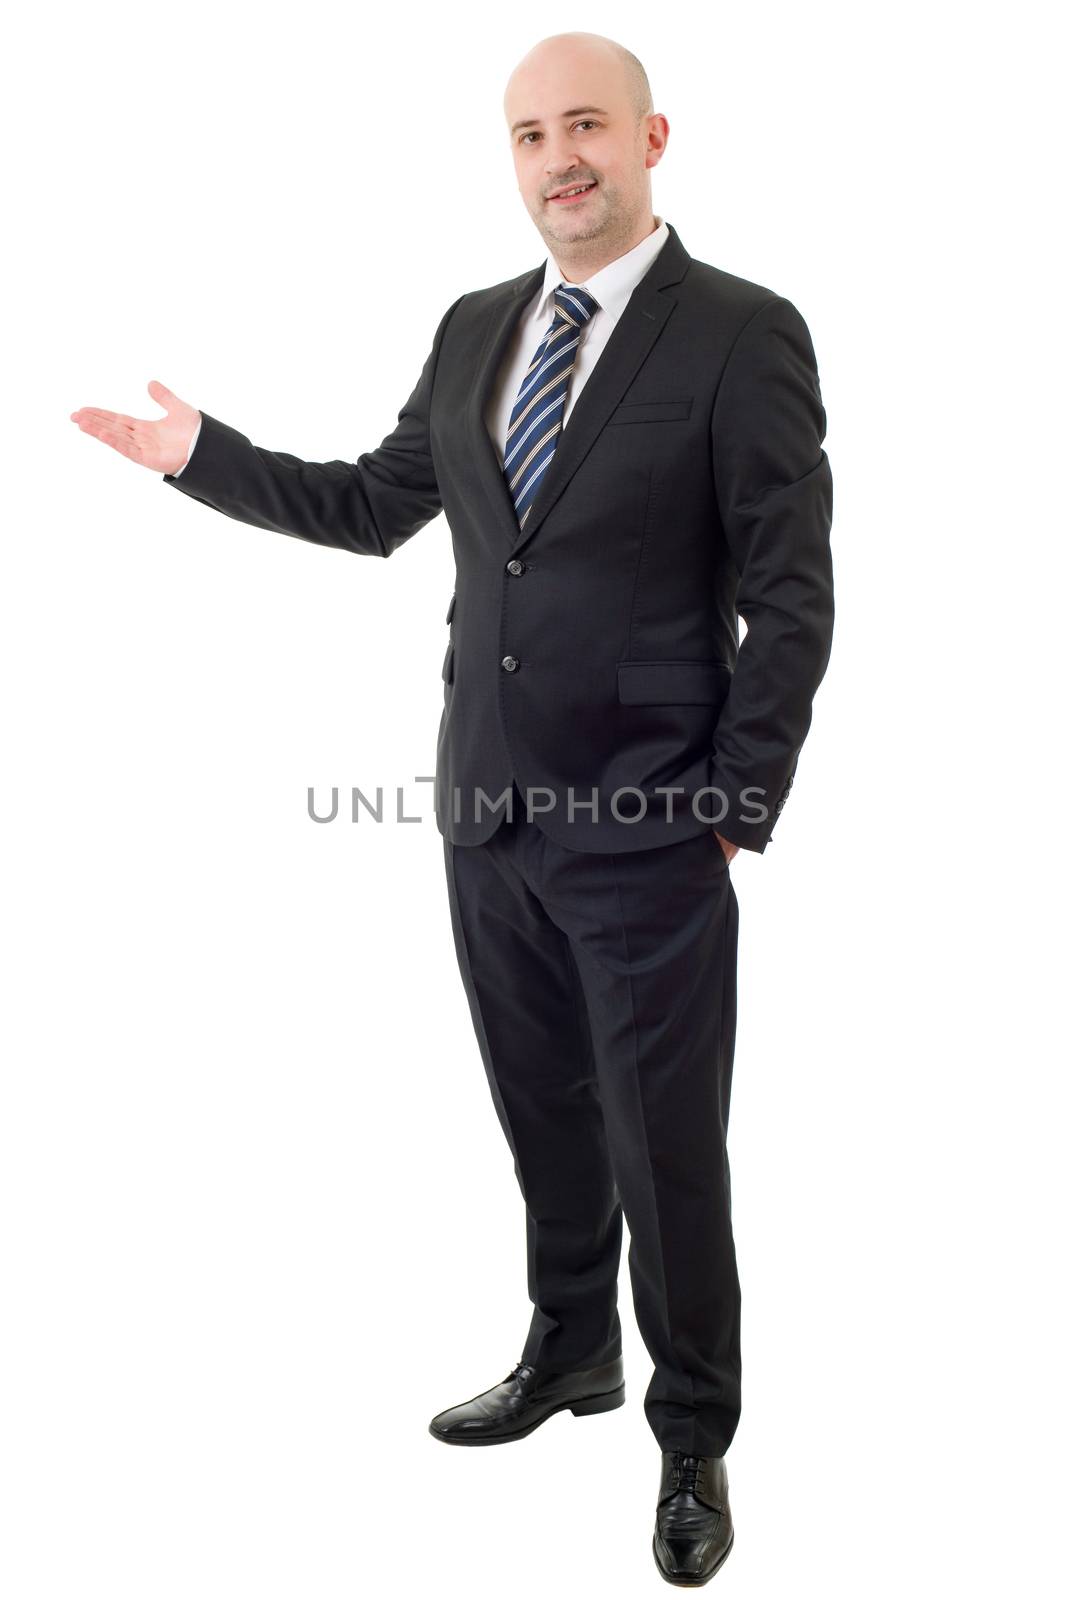 Handsome businessman with arm out in a welcoming gesture, isolated on white